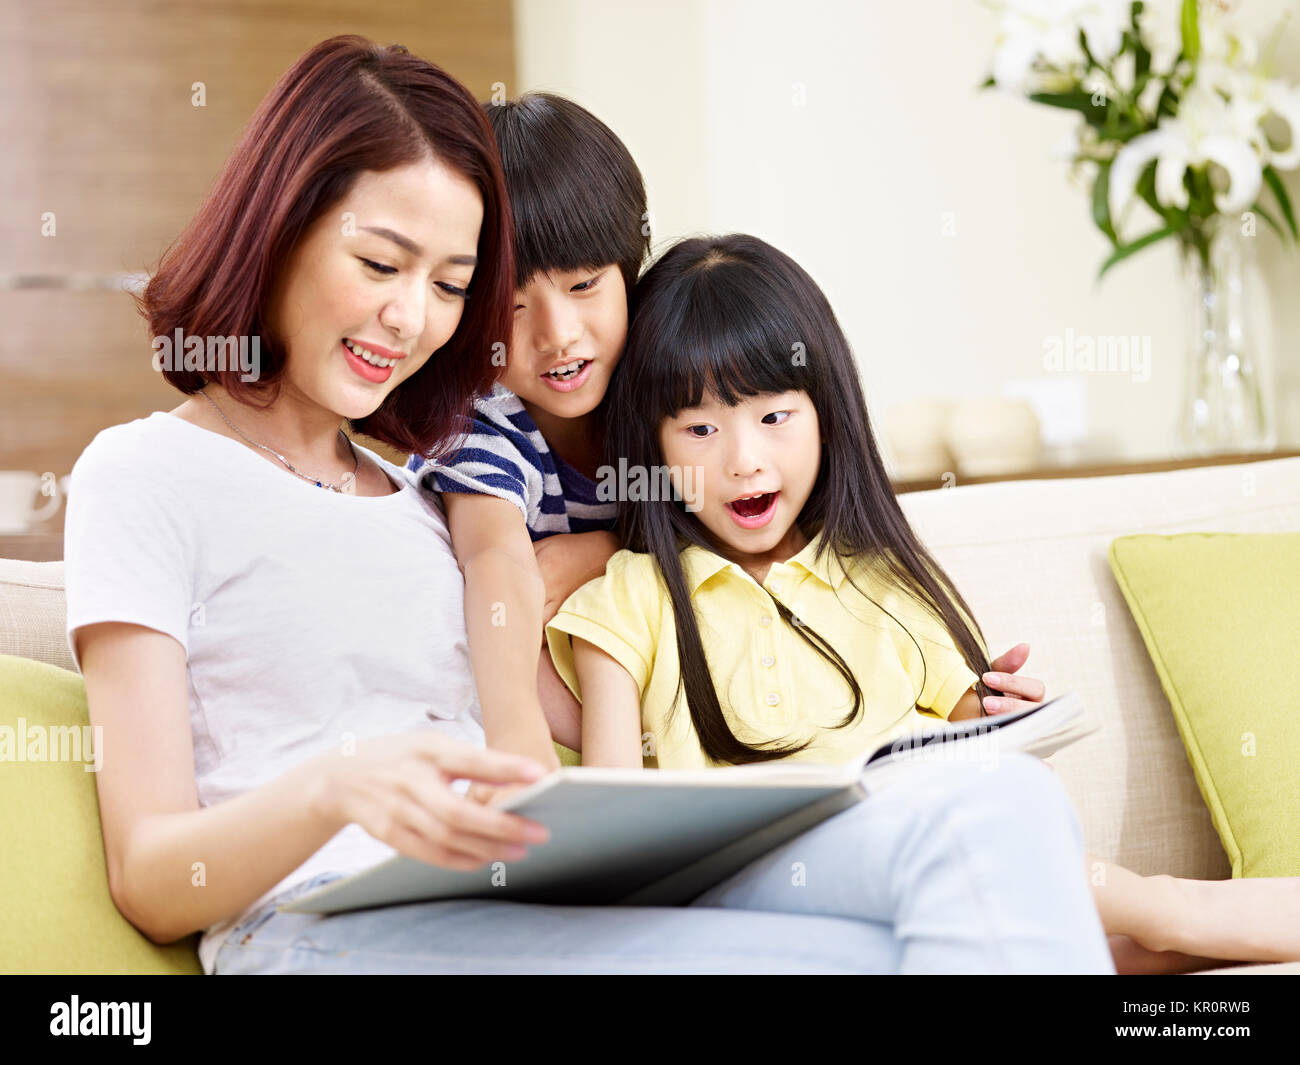 young asian mother sitting on couch at home reading story to two little children. Stock Photo